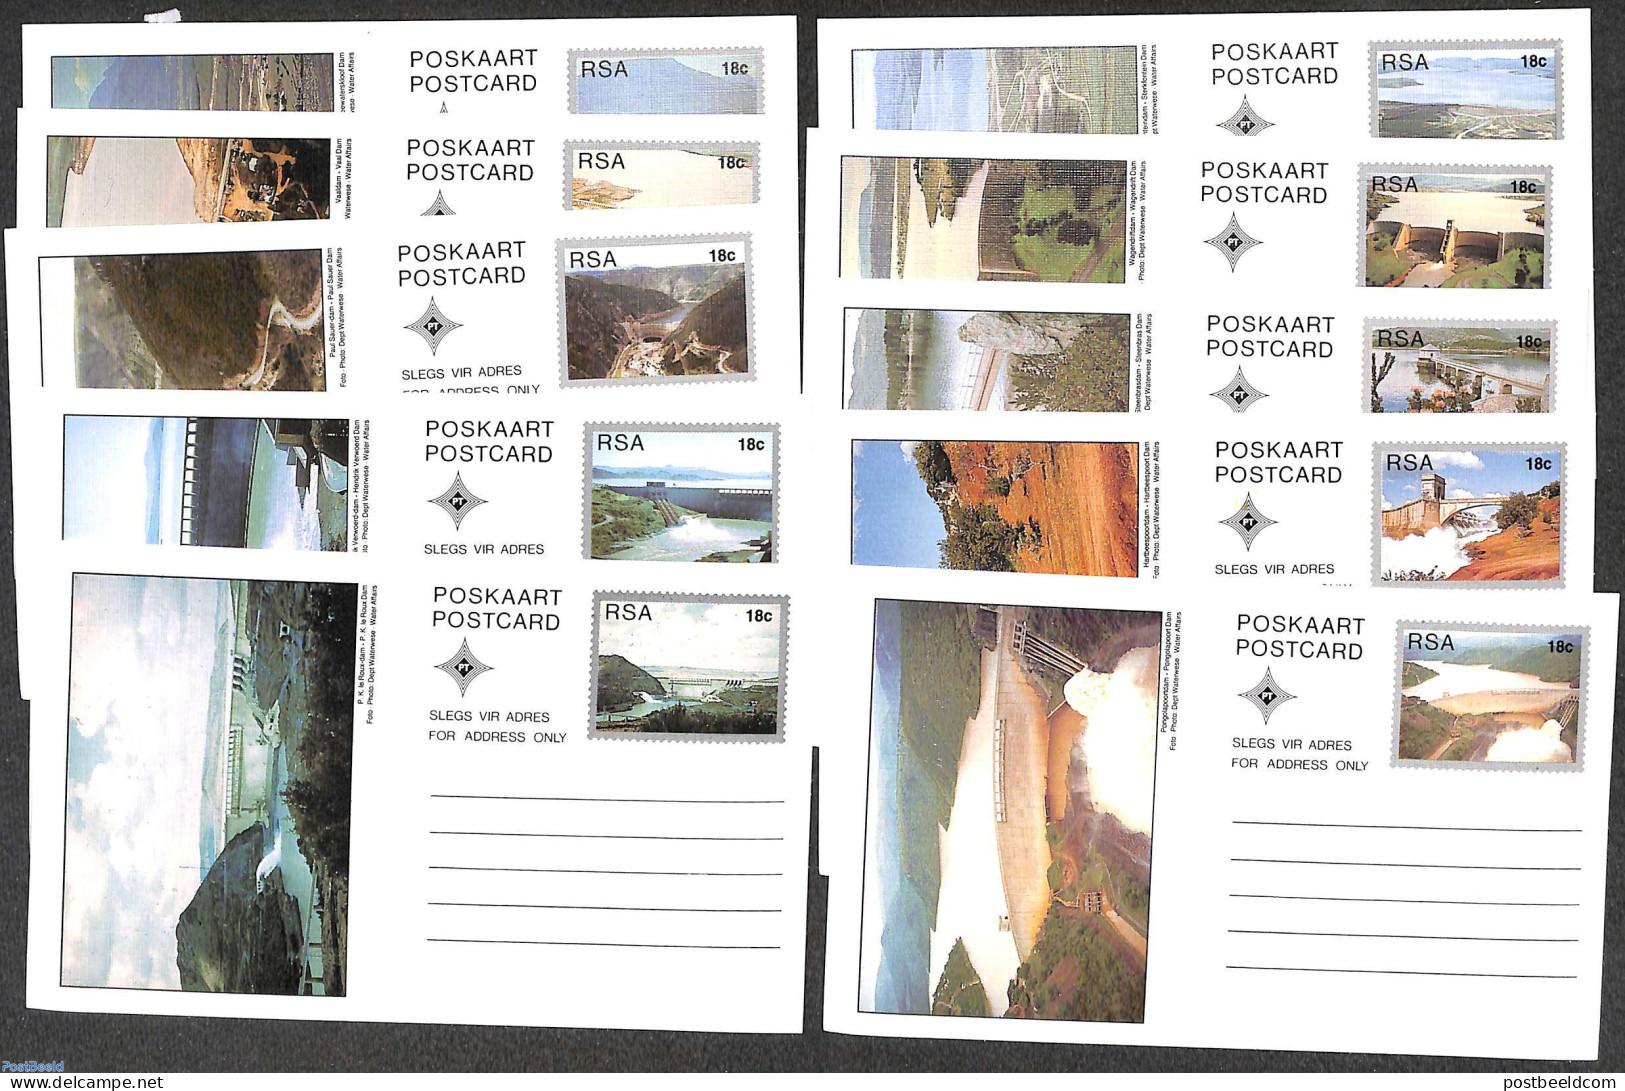 South Africa 1989 Postcard Set Dams 18c (10 Cards), Unused Postal Stationary, Nature - Water, Dams & Falls - Lettres & Documents